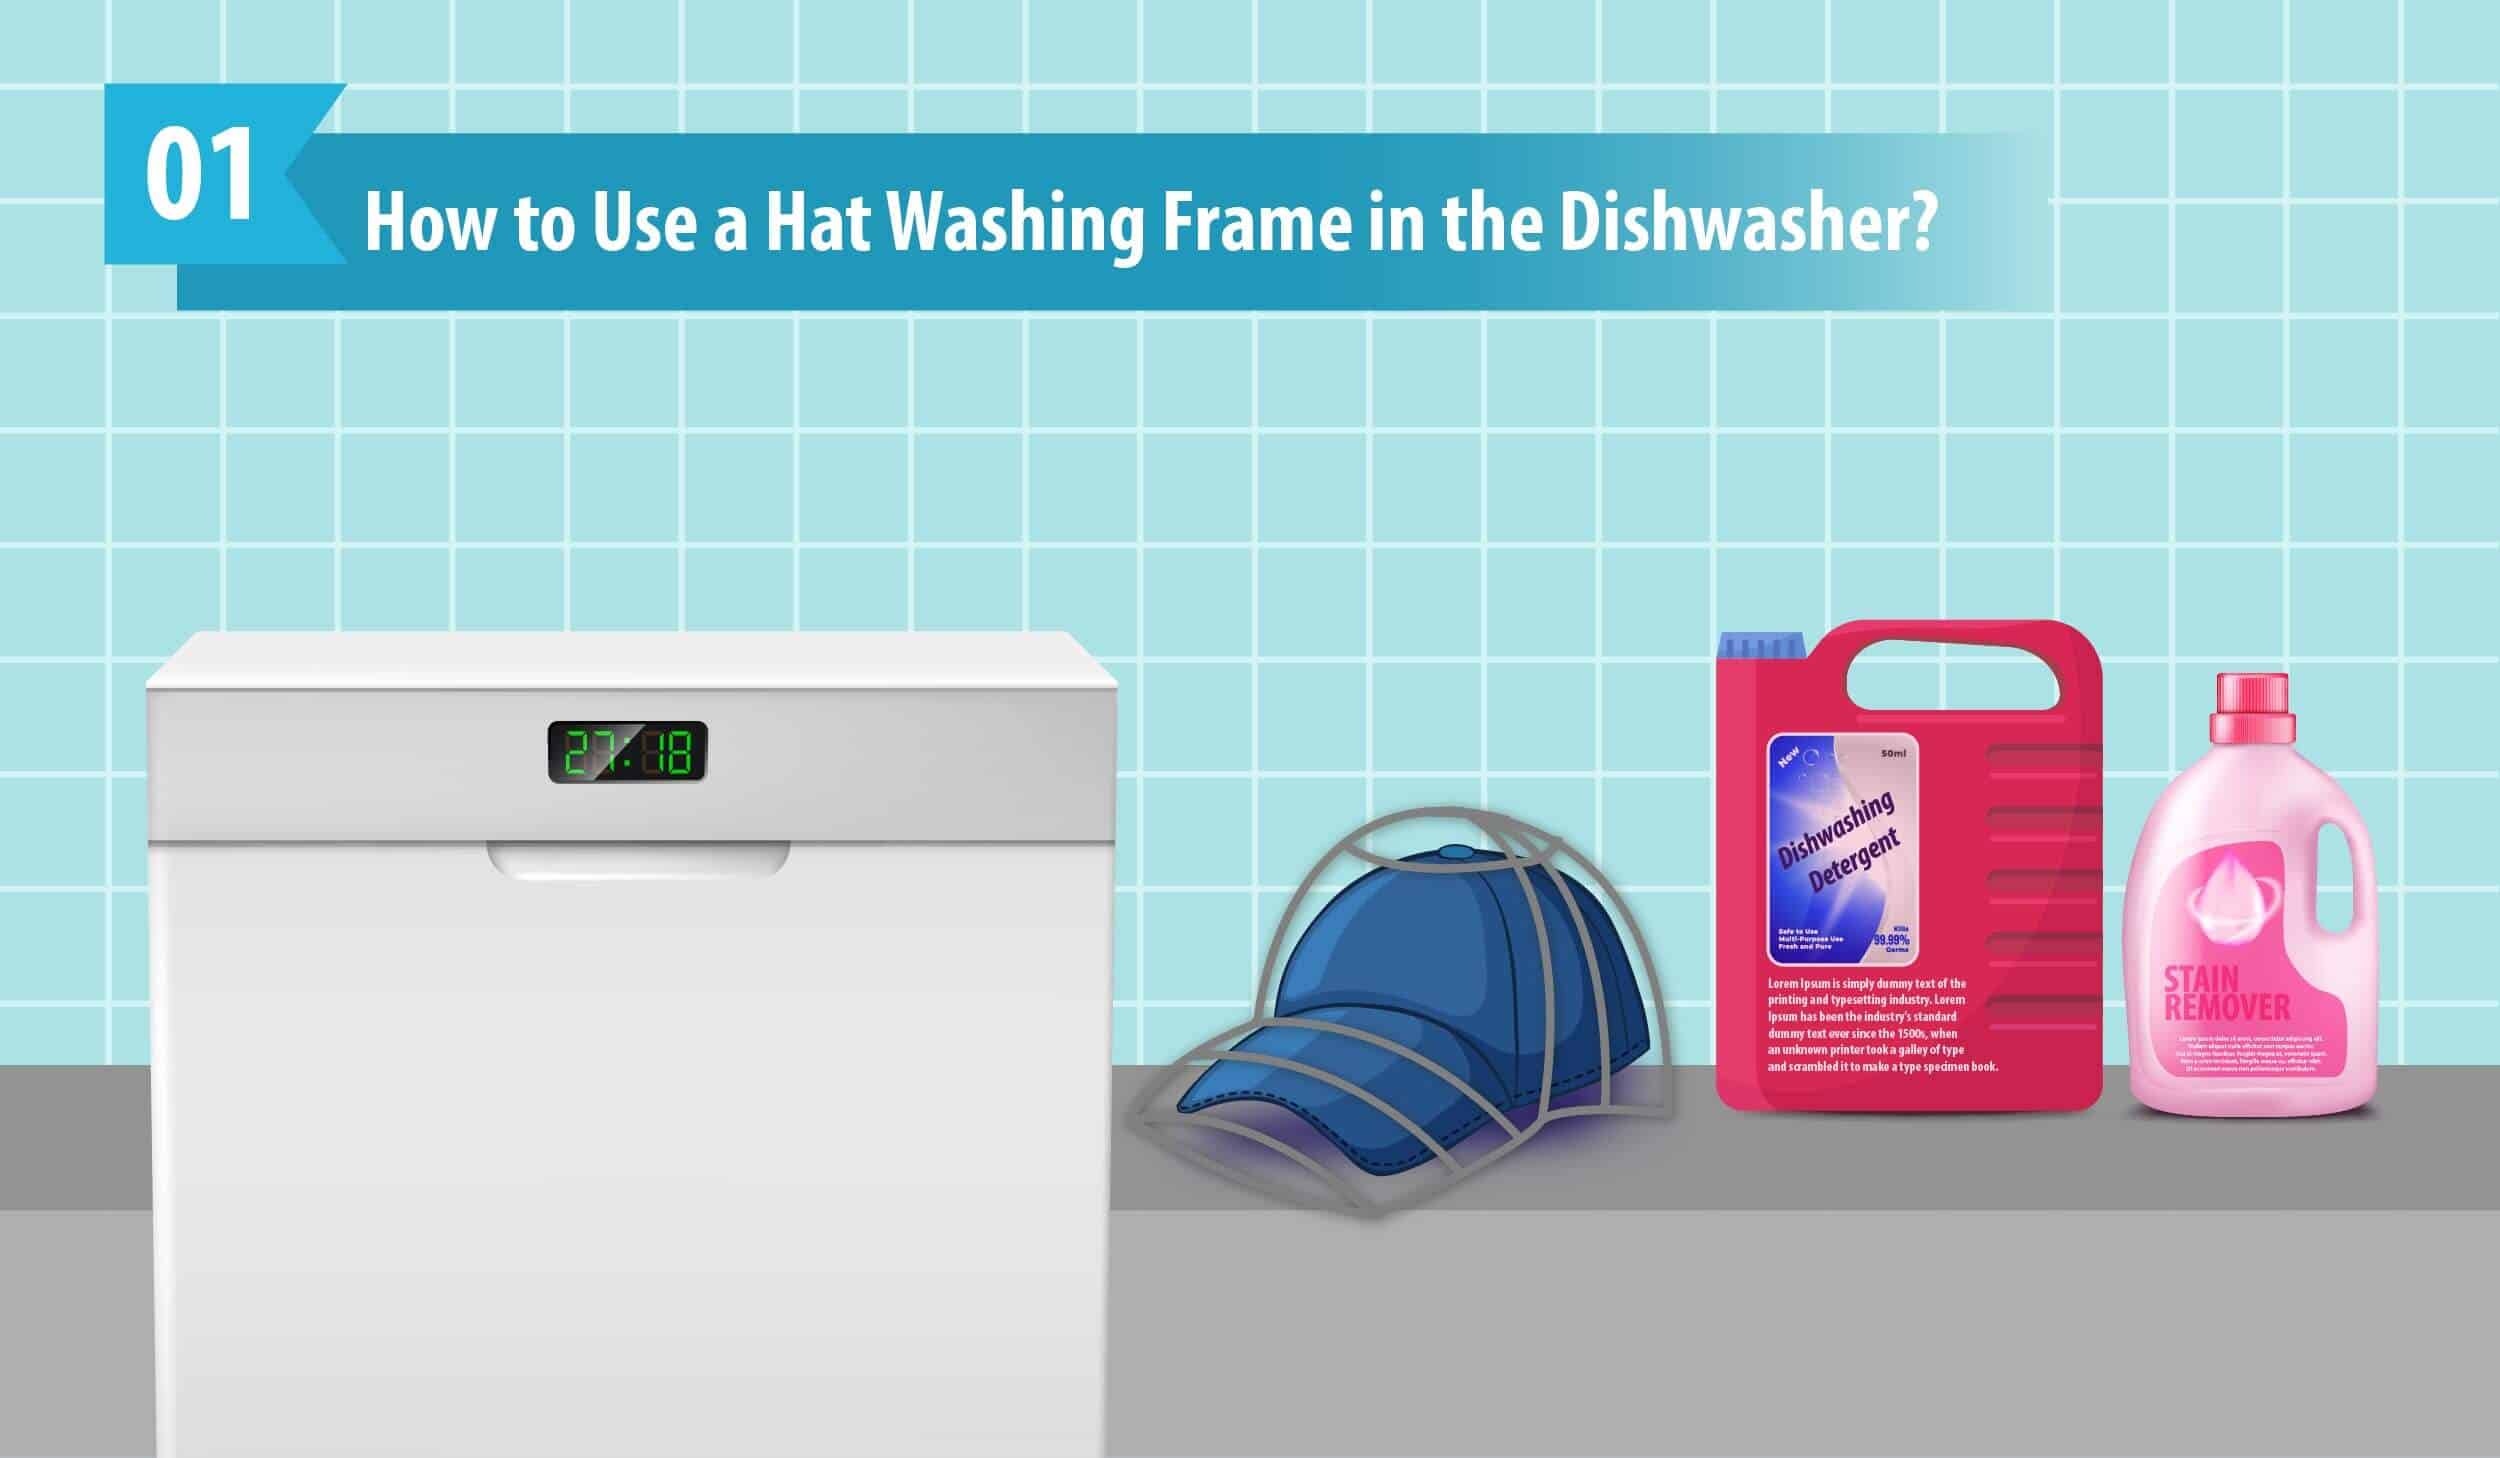 How to Use a Hat Washing Frame in the Dishwasher